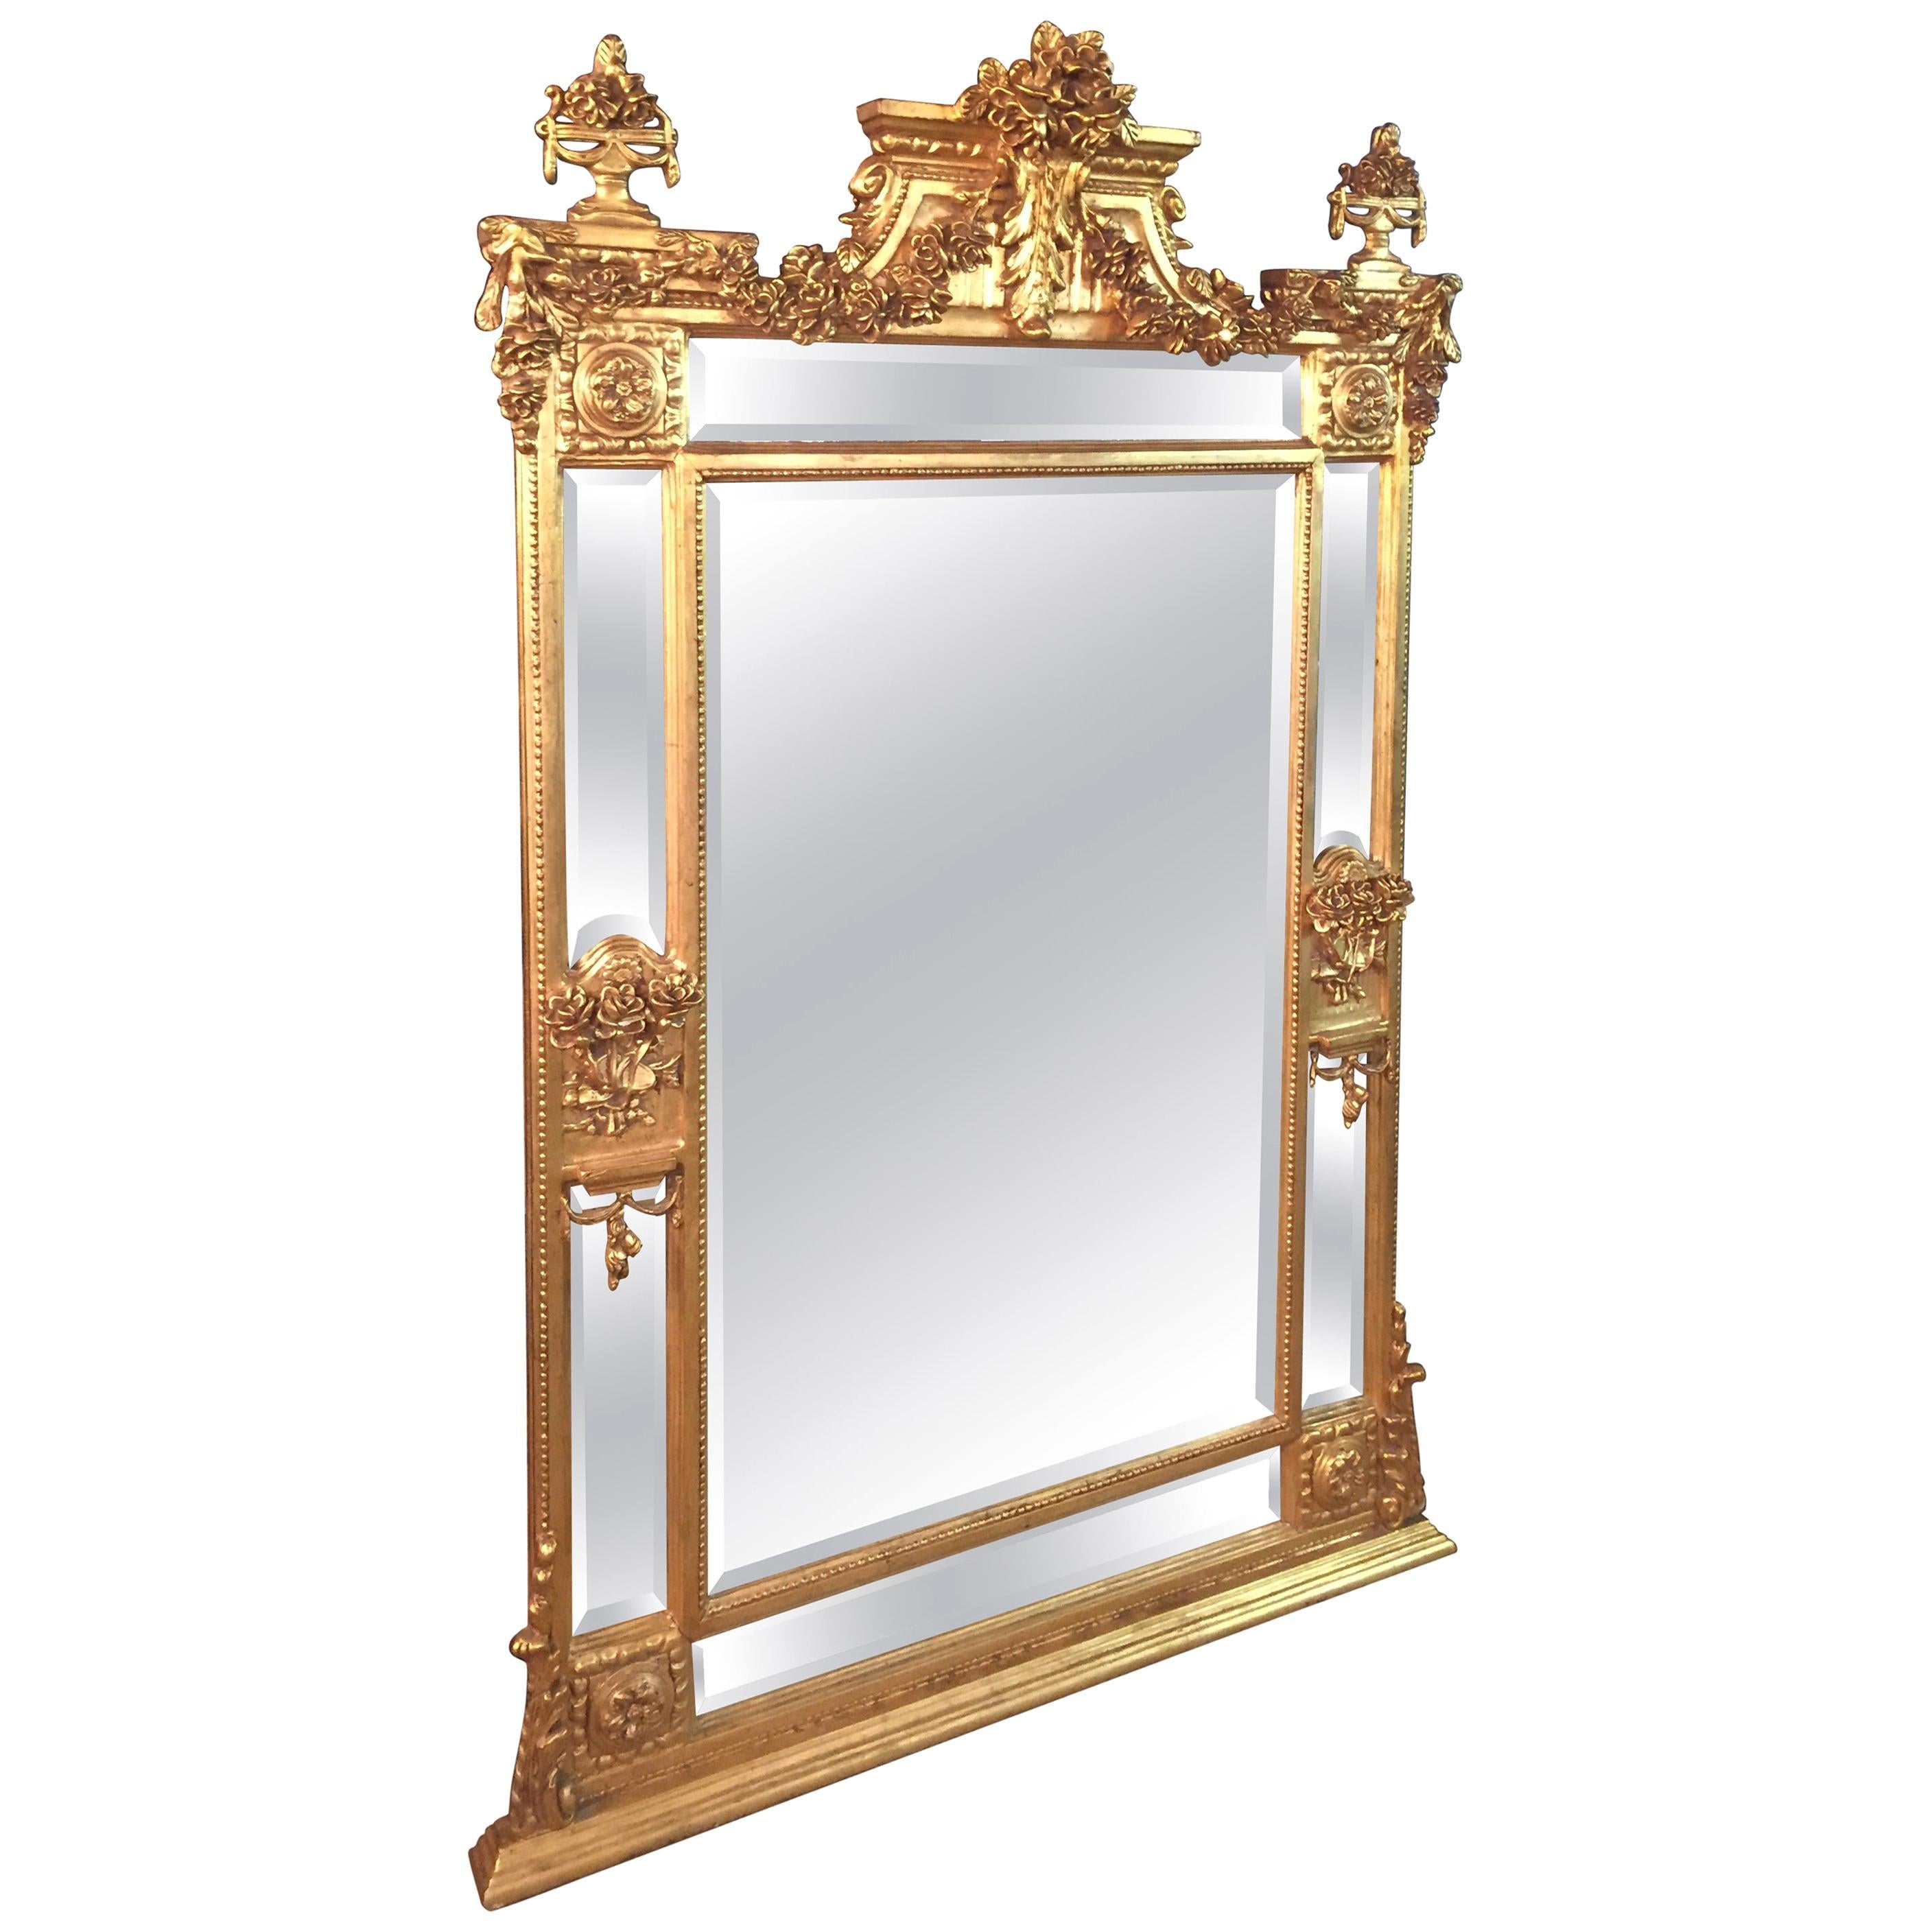 High Quality Salon Mirror in Louis Seize Style